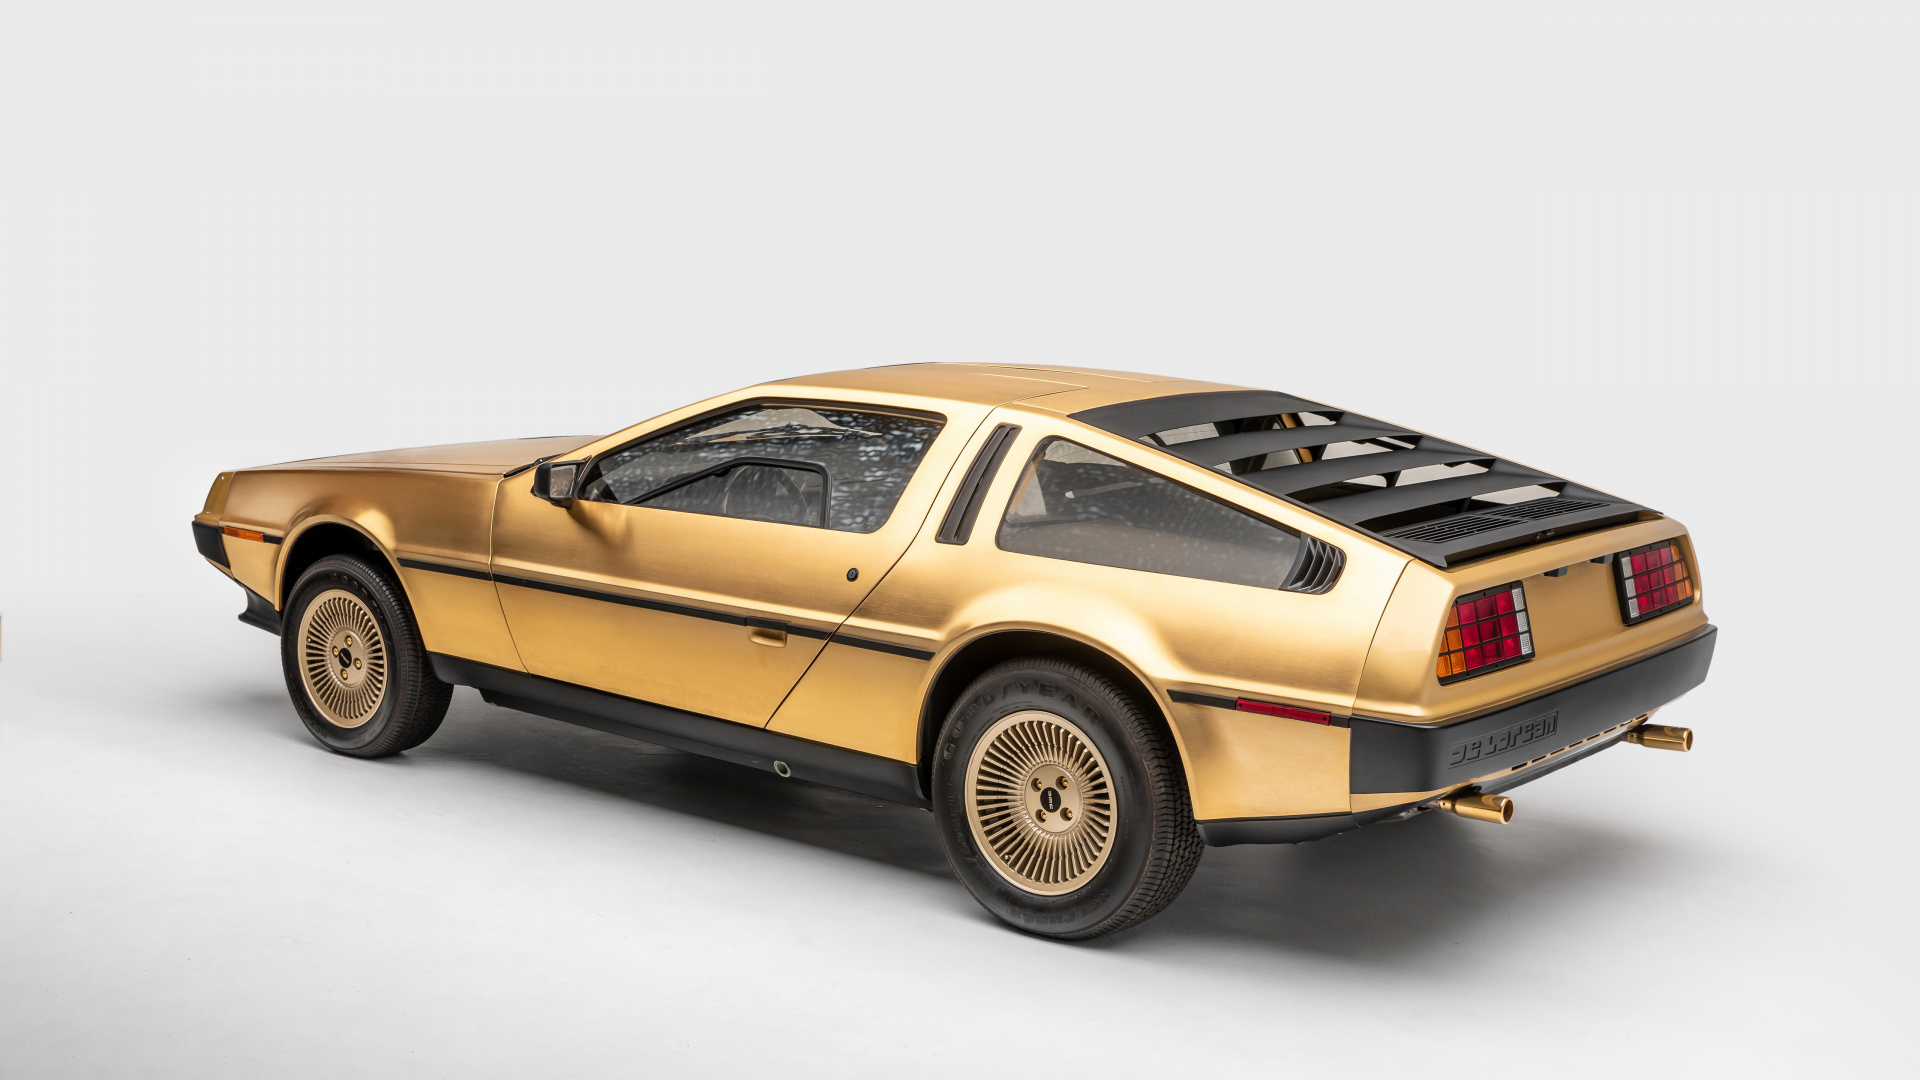 Delorean Dmc 12, DMC DeLorean, DeLorean, DeLorean Motor Company, Roue. Wallpaper in 1920x1080 Resolution